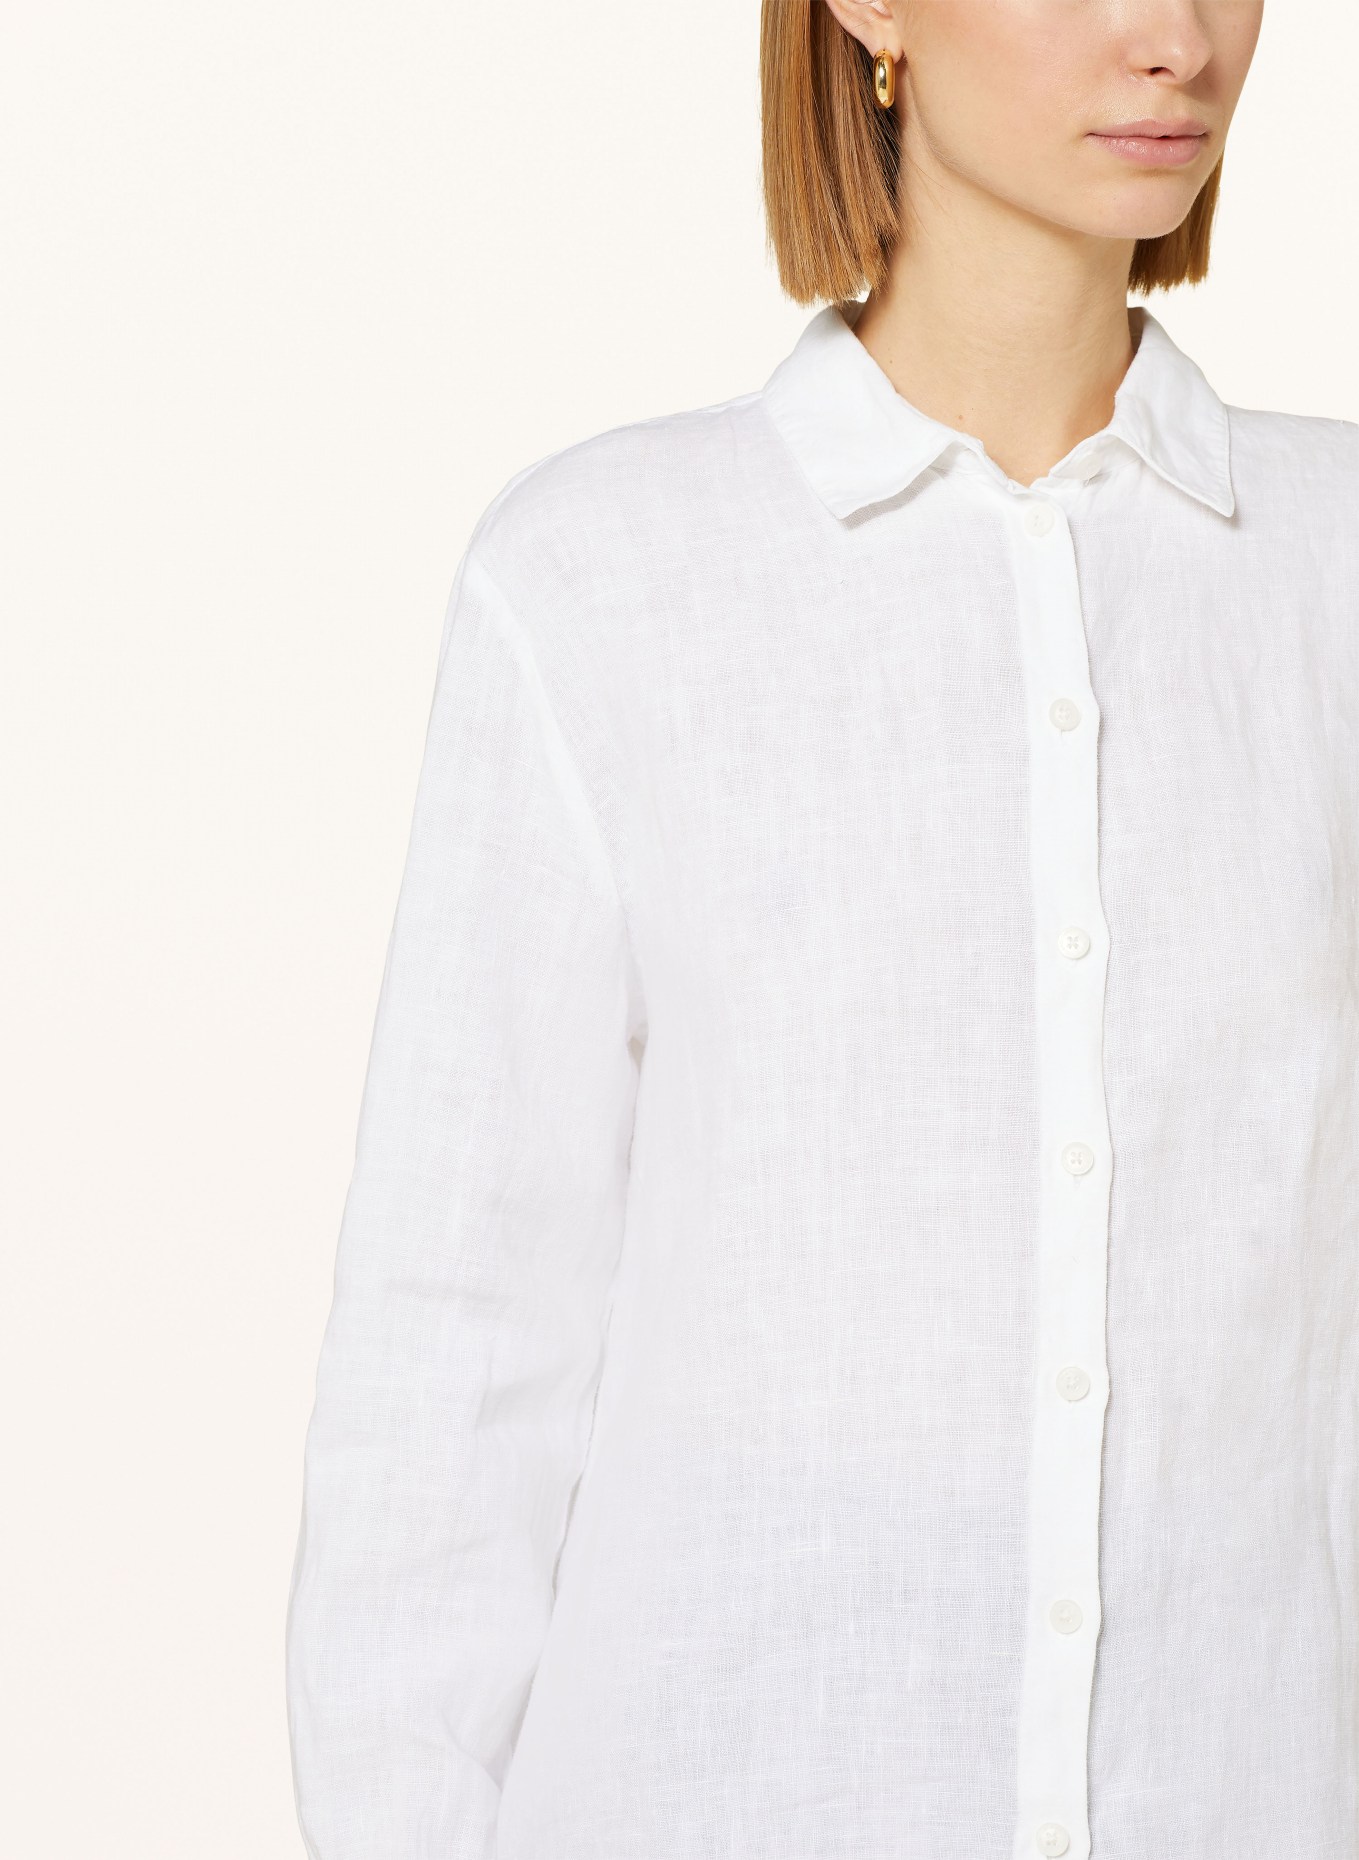 RIANI Shirt blouse made of linen, Color: WHITE (Image 4)